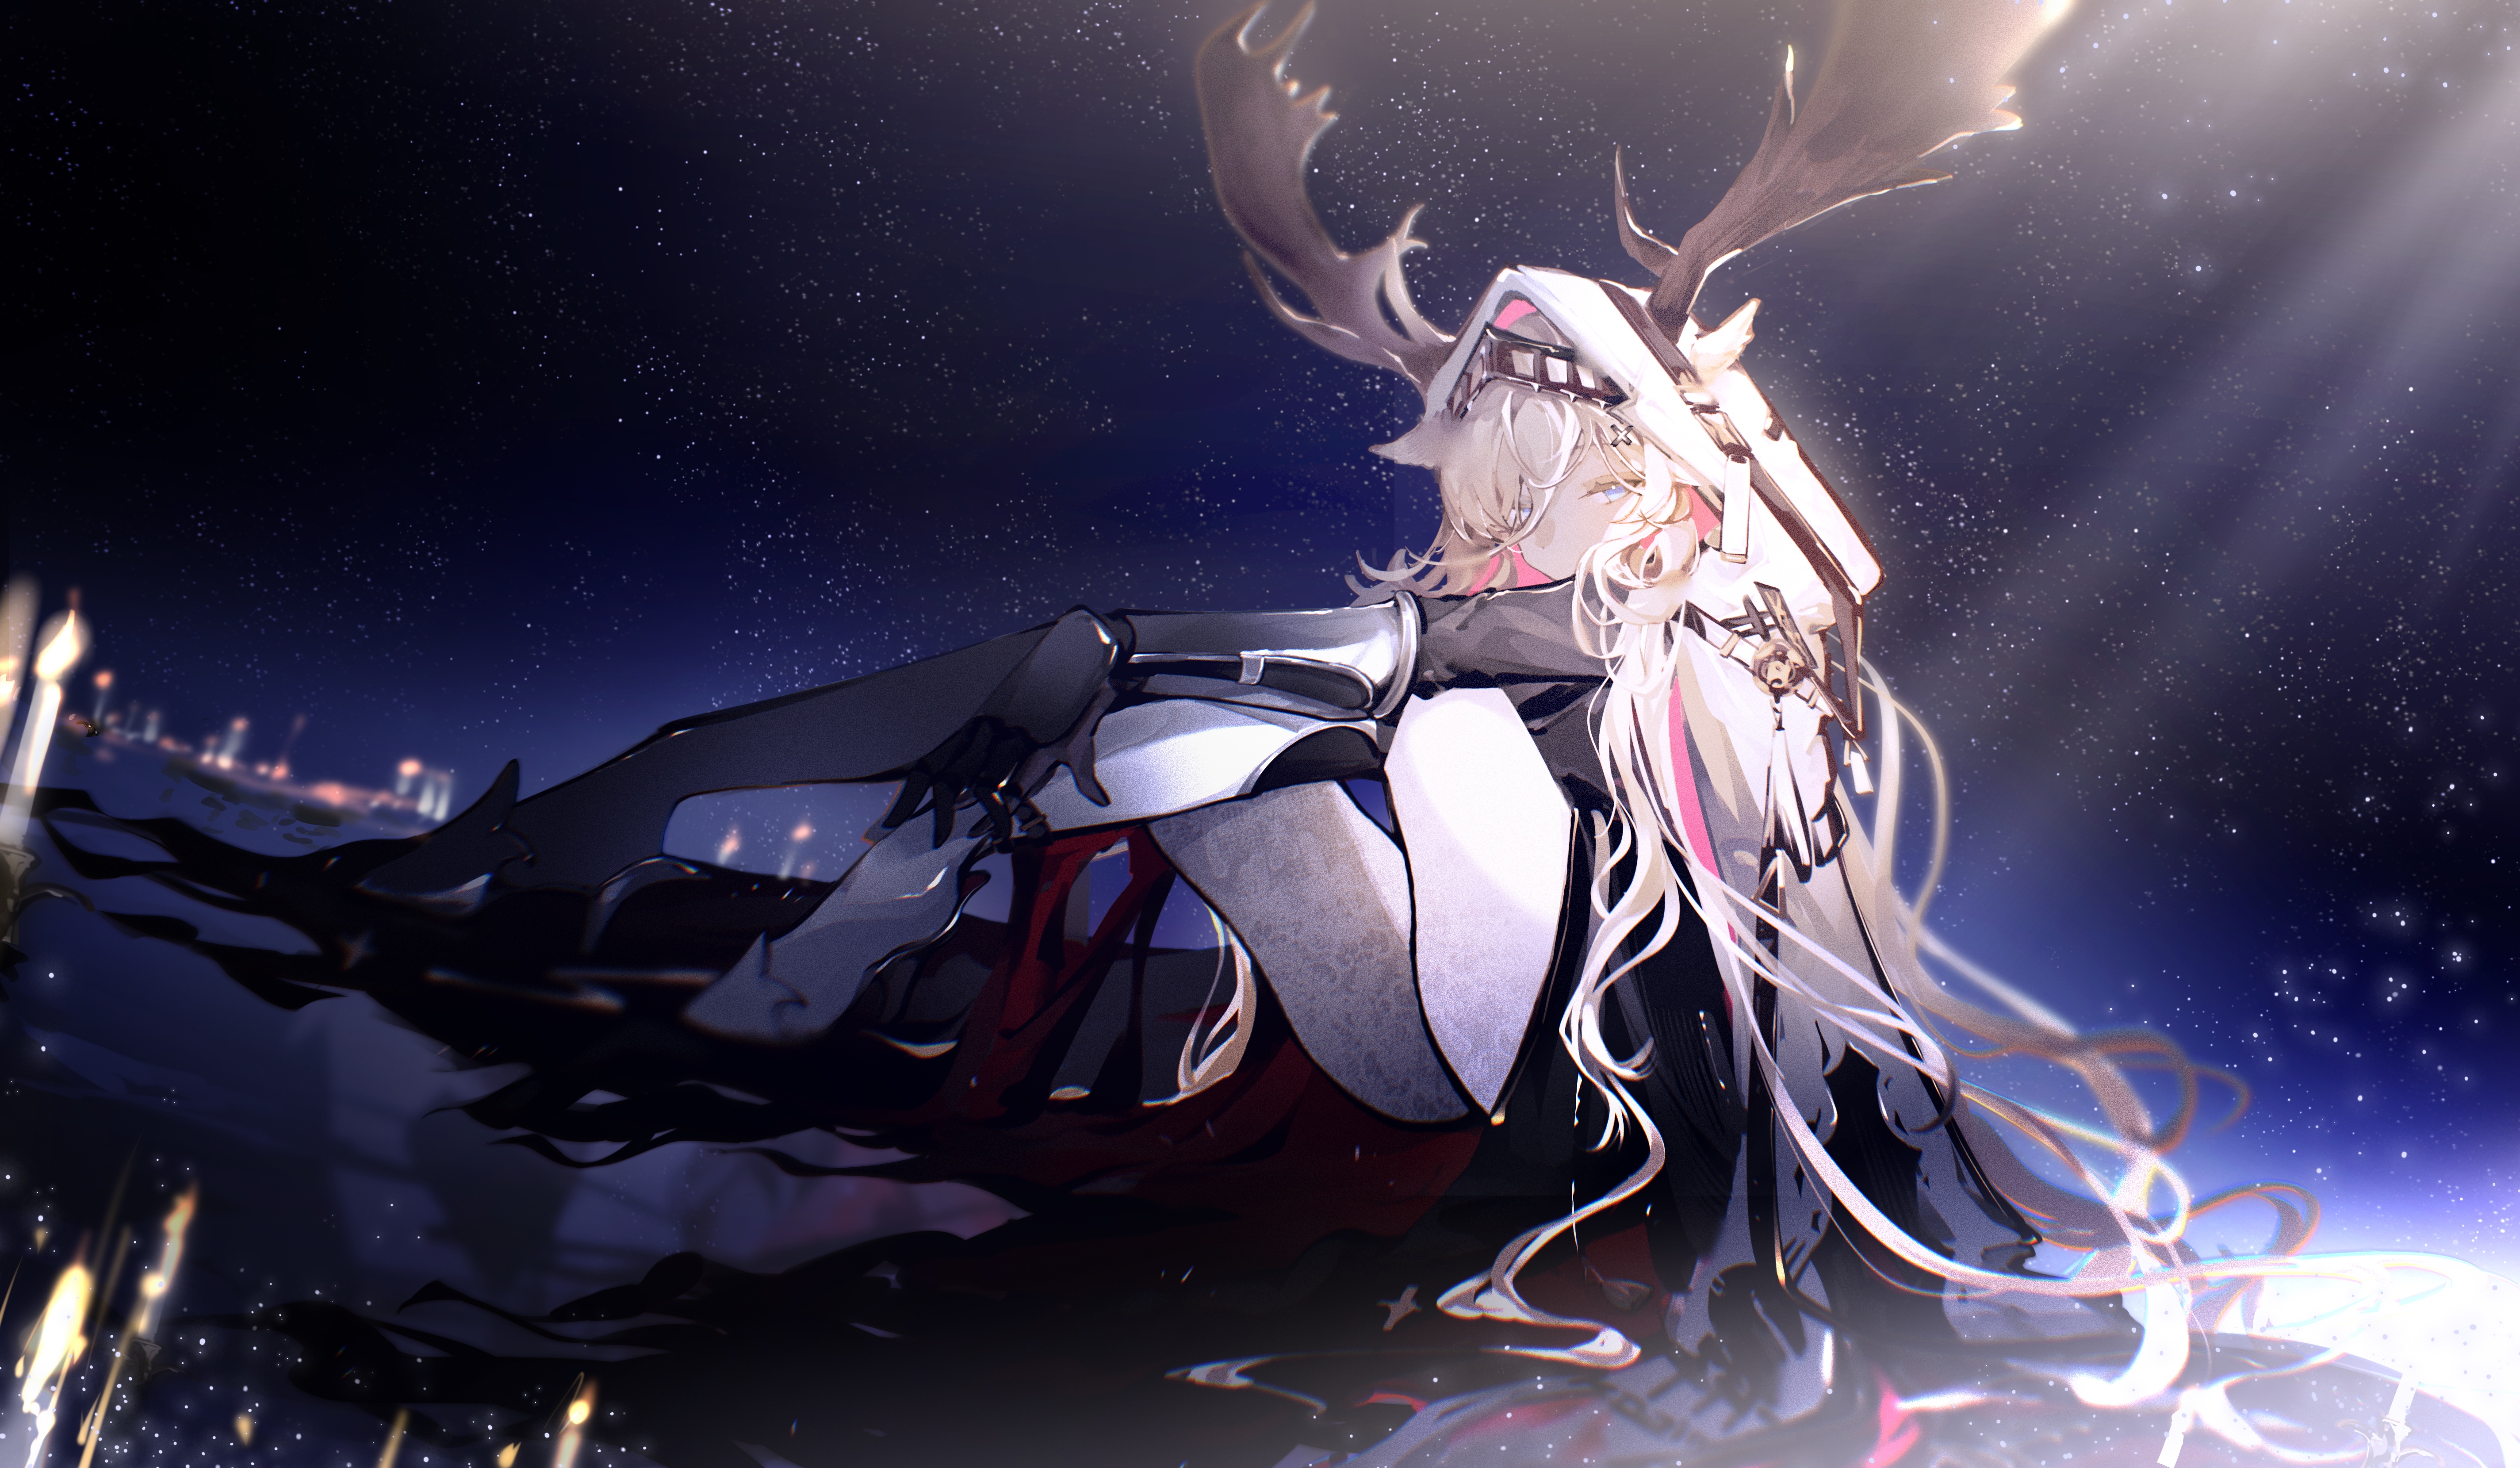 Anime 5698x3319 anime anime girls candles stars reflection long hair Arknights The Candle Knight Viviana (Arknights)